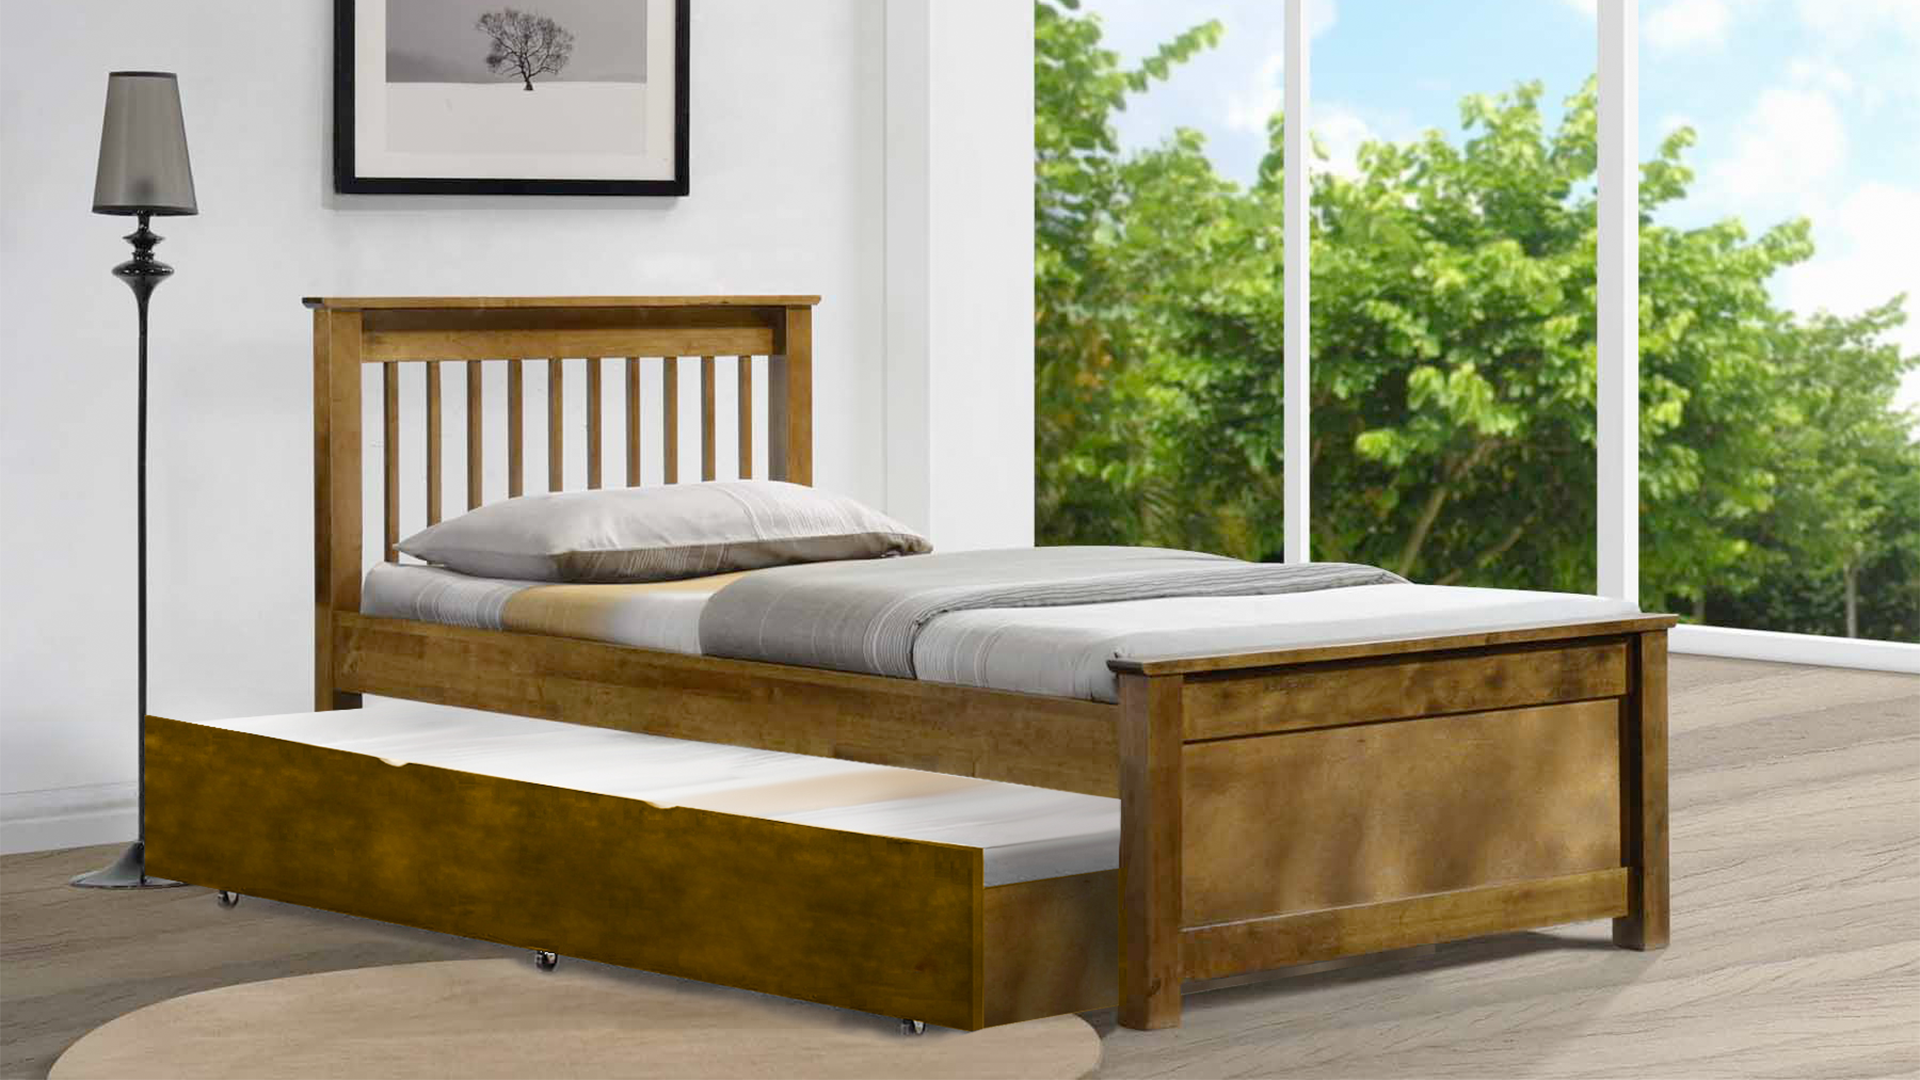 Top 10 Super Single Bed Frames To Buy In Singapore - Custom / Wood